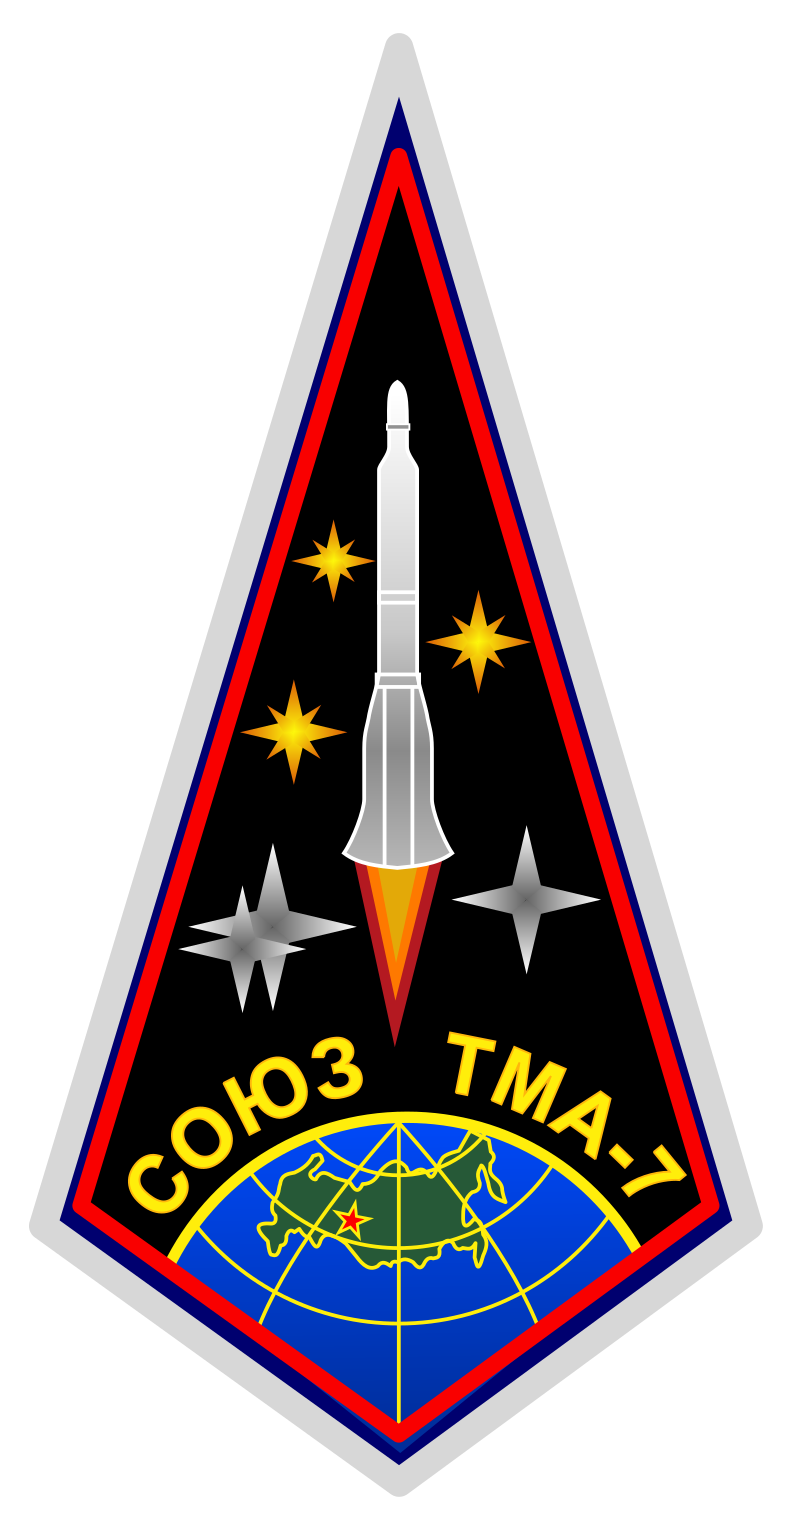 Mission patch for Soyuz TMA-7